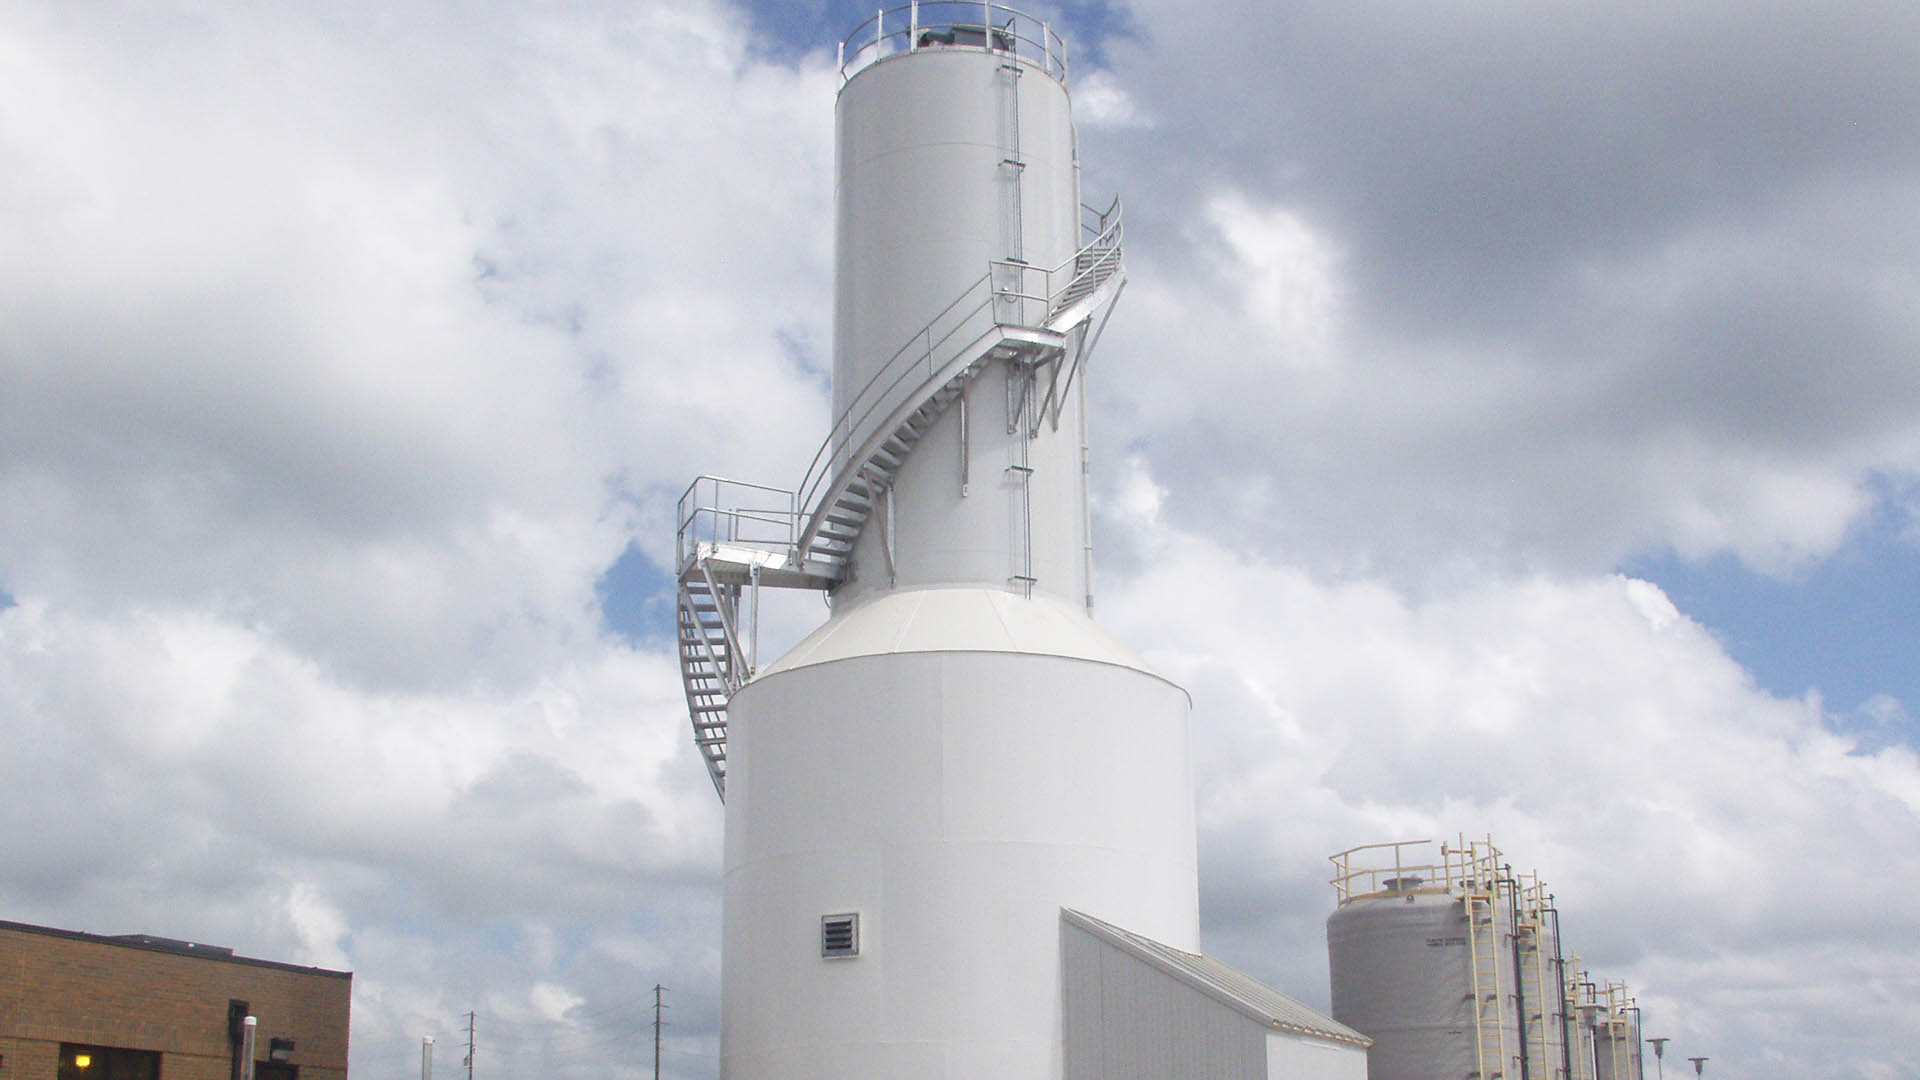 Silo outside a manufacturing plant